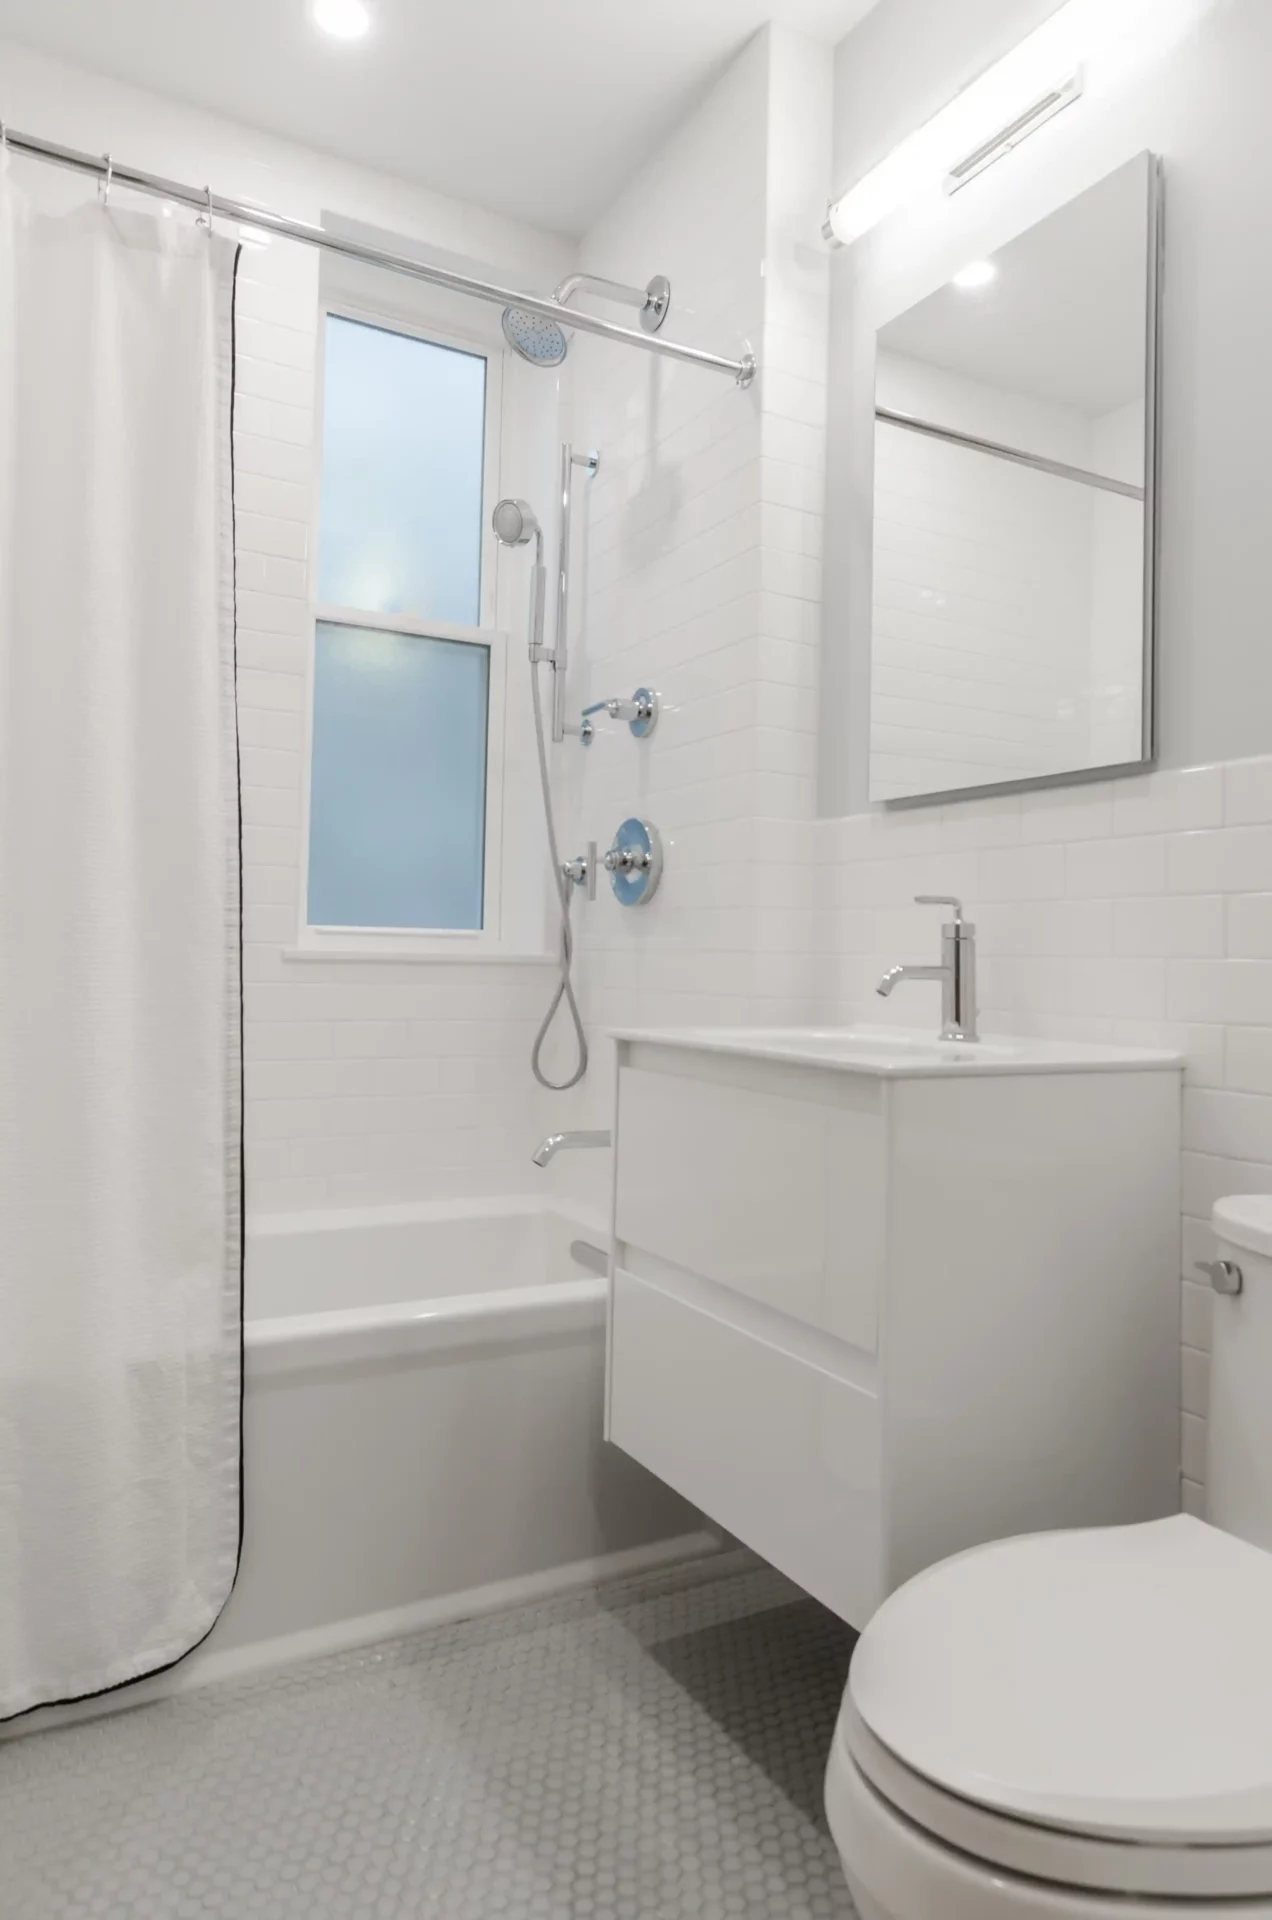 A white bathroom with a shower curtain, whose hooks slide smoothly.